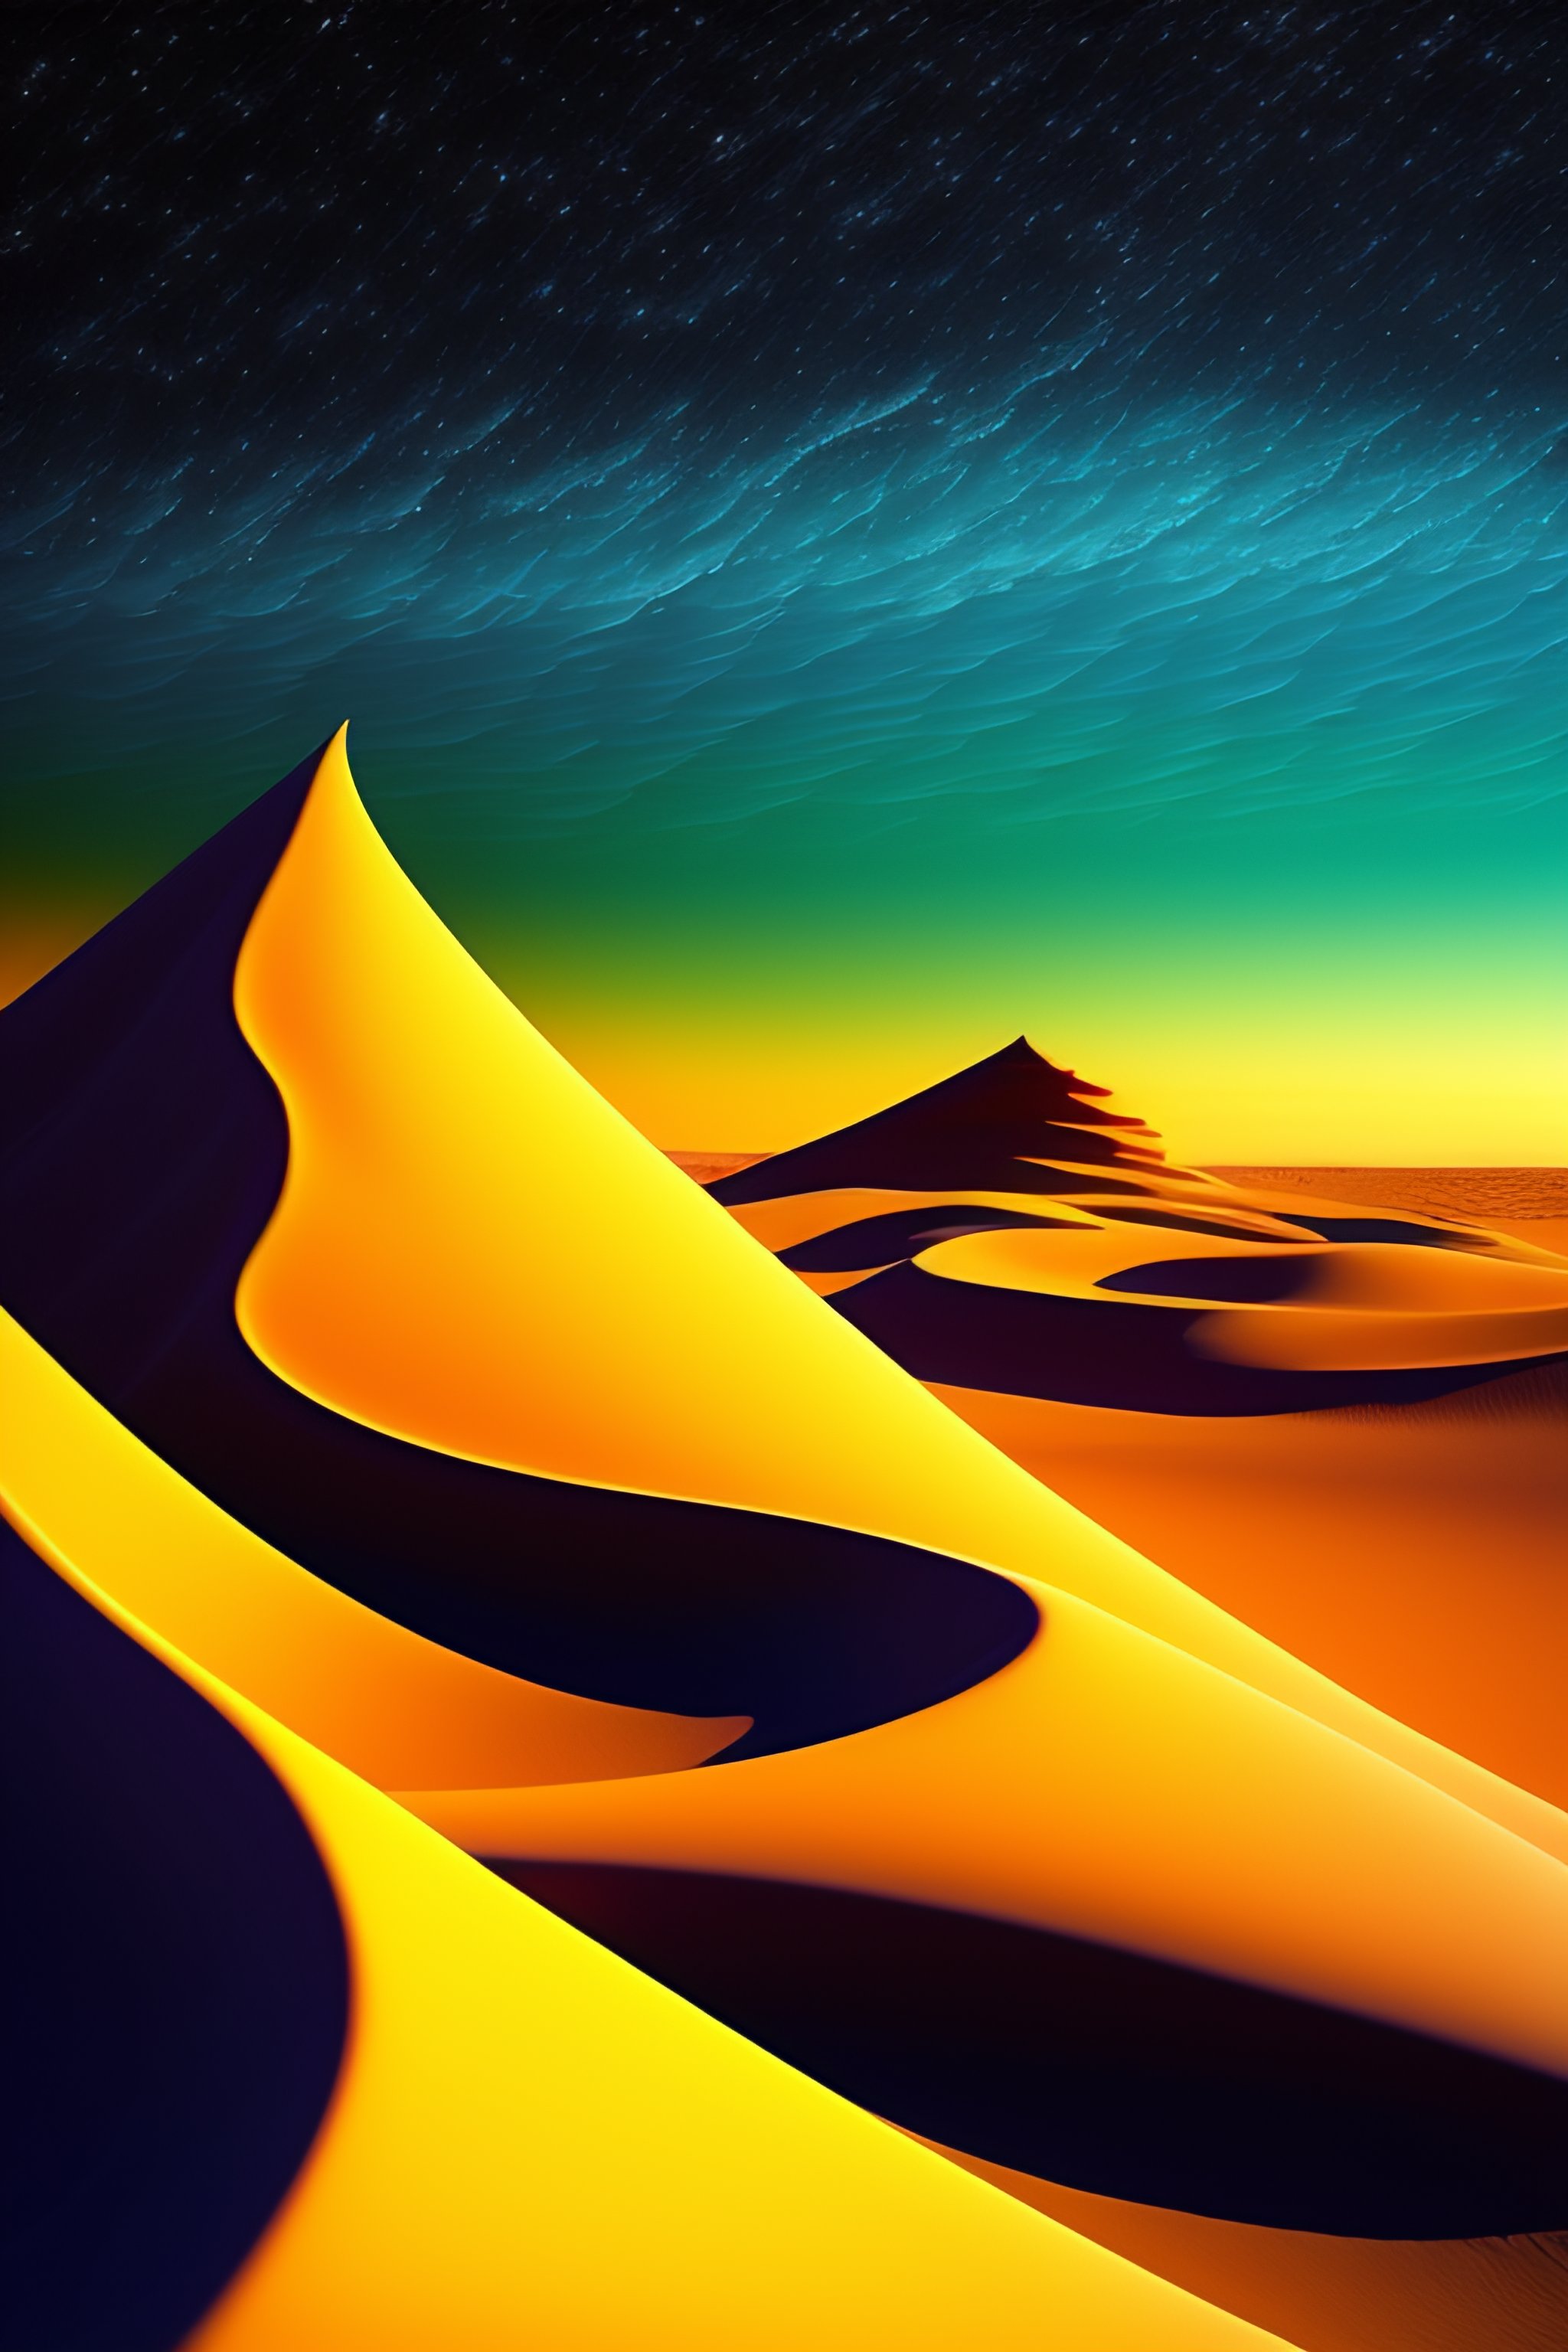 Lexica - Sandworms Dune in the style of vincent van gogh